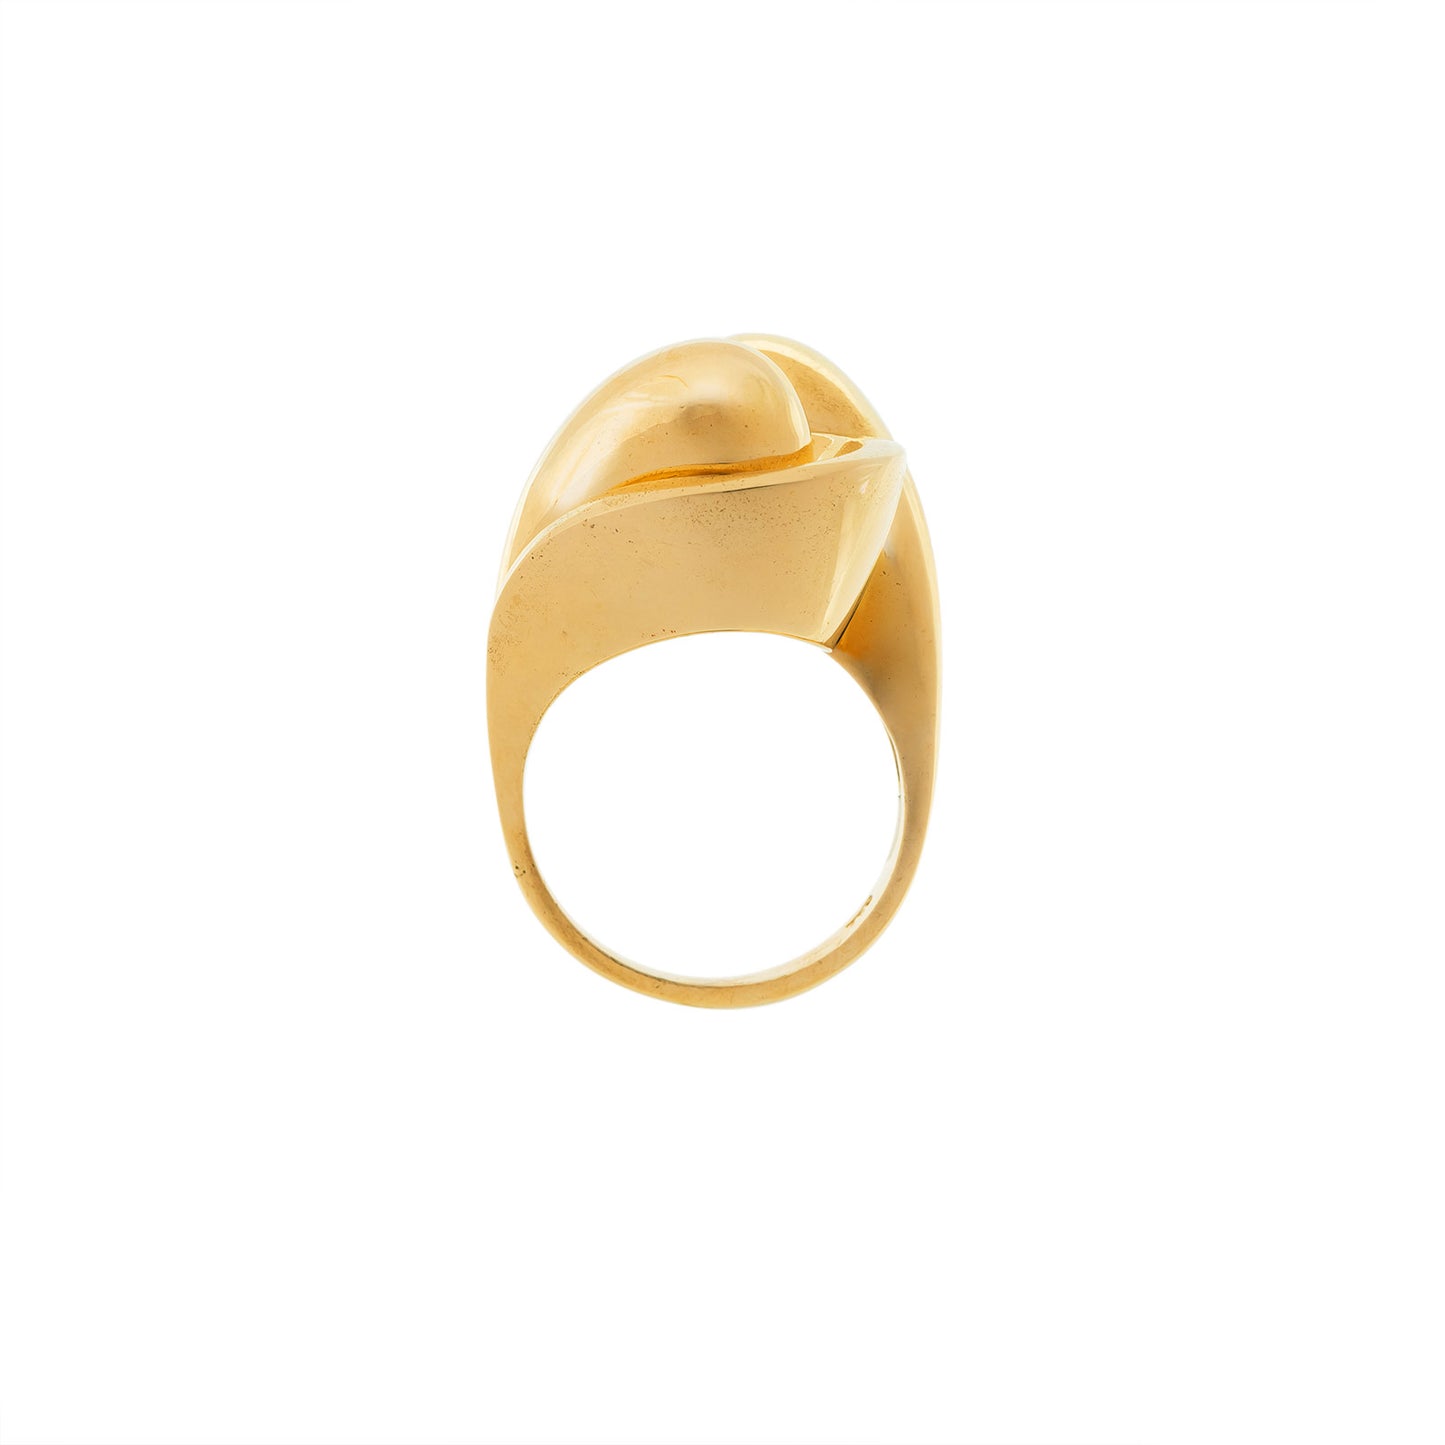 Vintage Cocktail Double Ring Yellow Gold 18K 750 Women's Jewelry Women's Ring Gold Ring